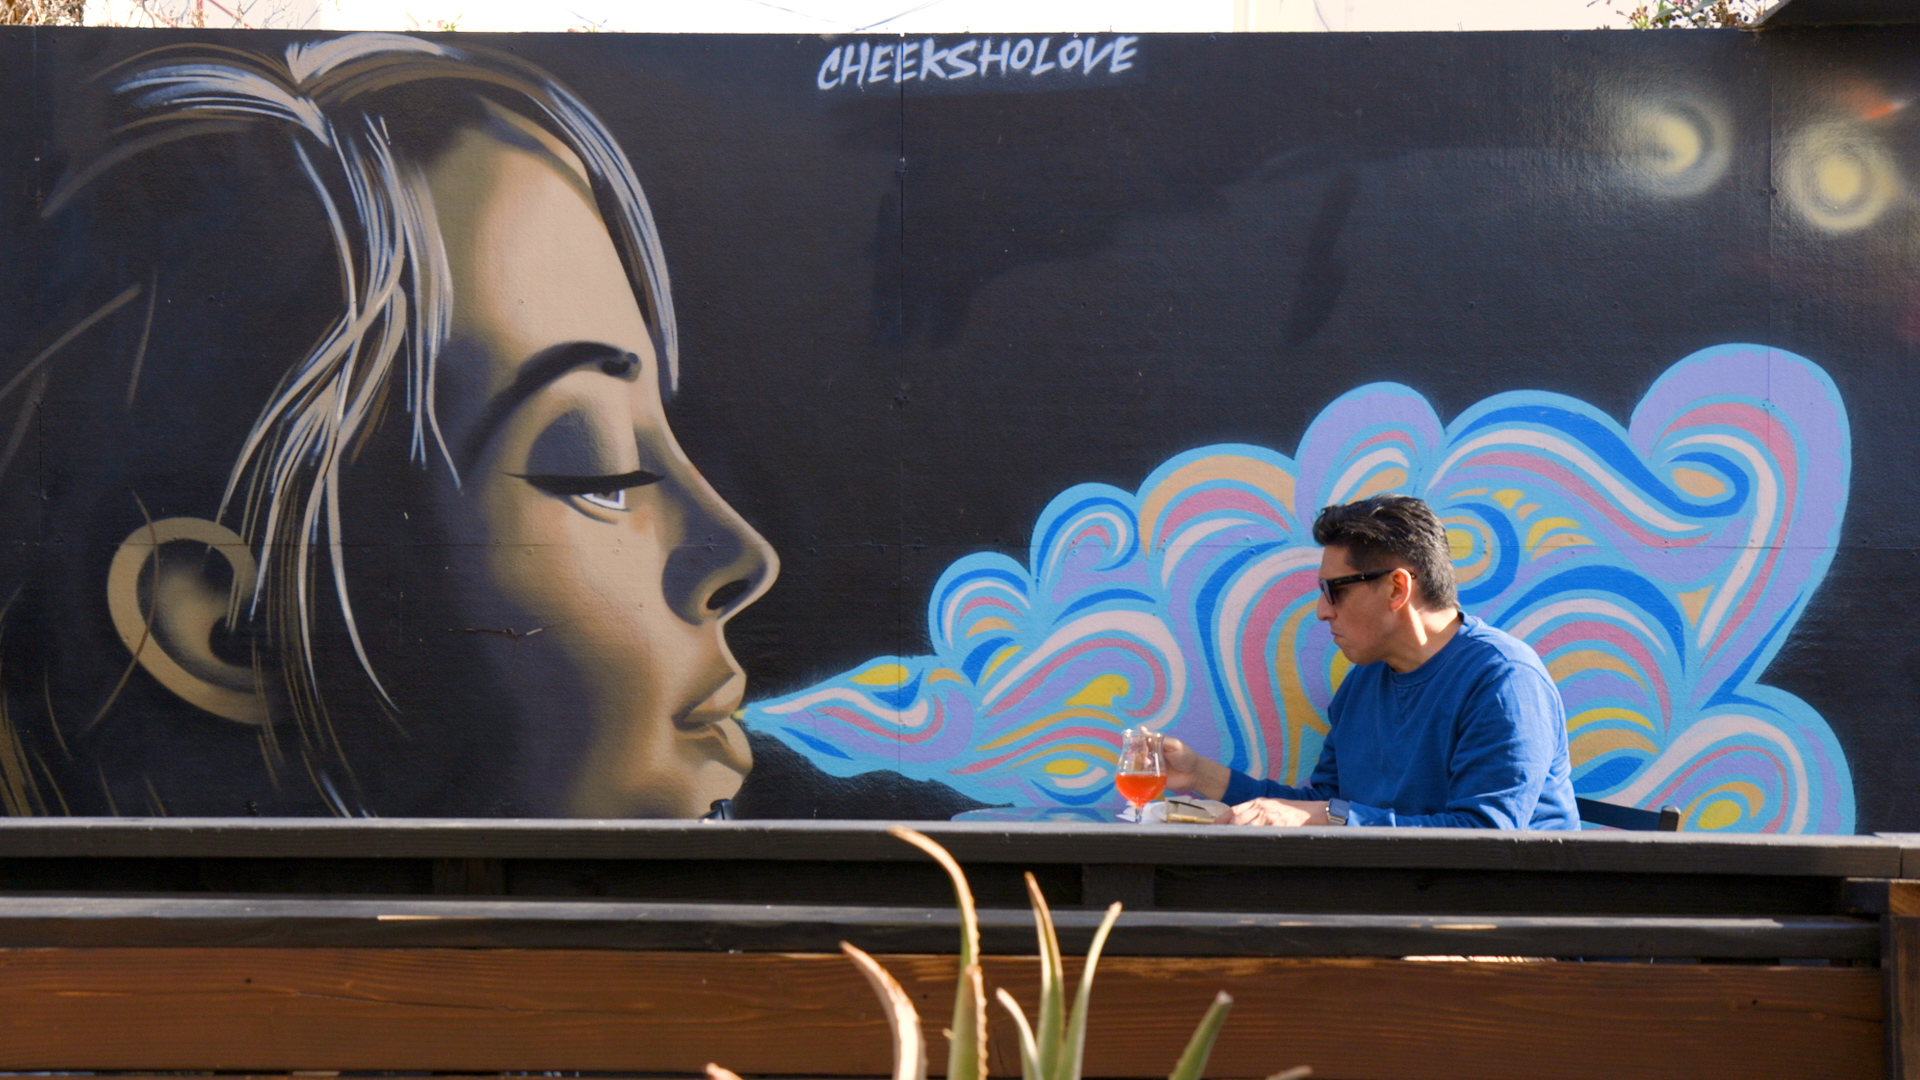 With roots in Mexican and street art, murals can be found throughout Barrio Logan, a Mexican-American neighborhood in San Diego.